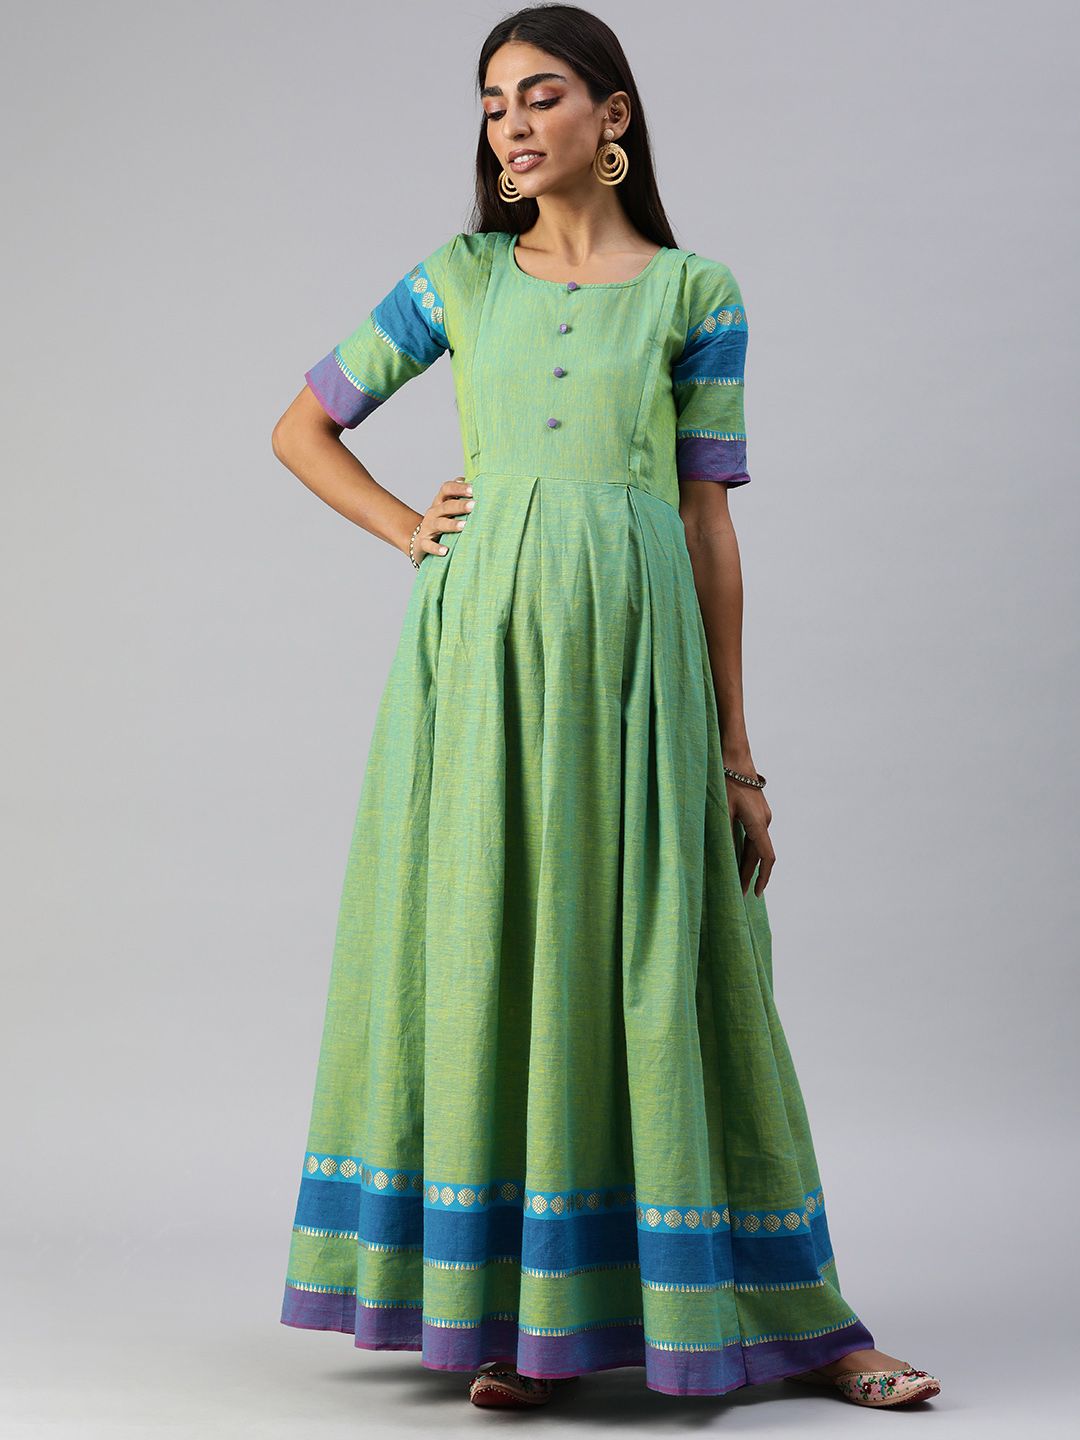 Swishchick Green Solid Maternity Maxi Dress Price in India